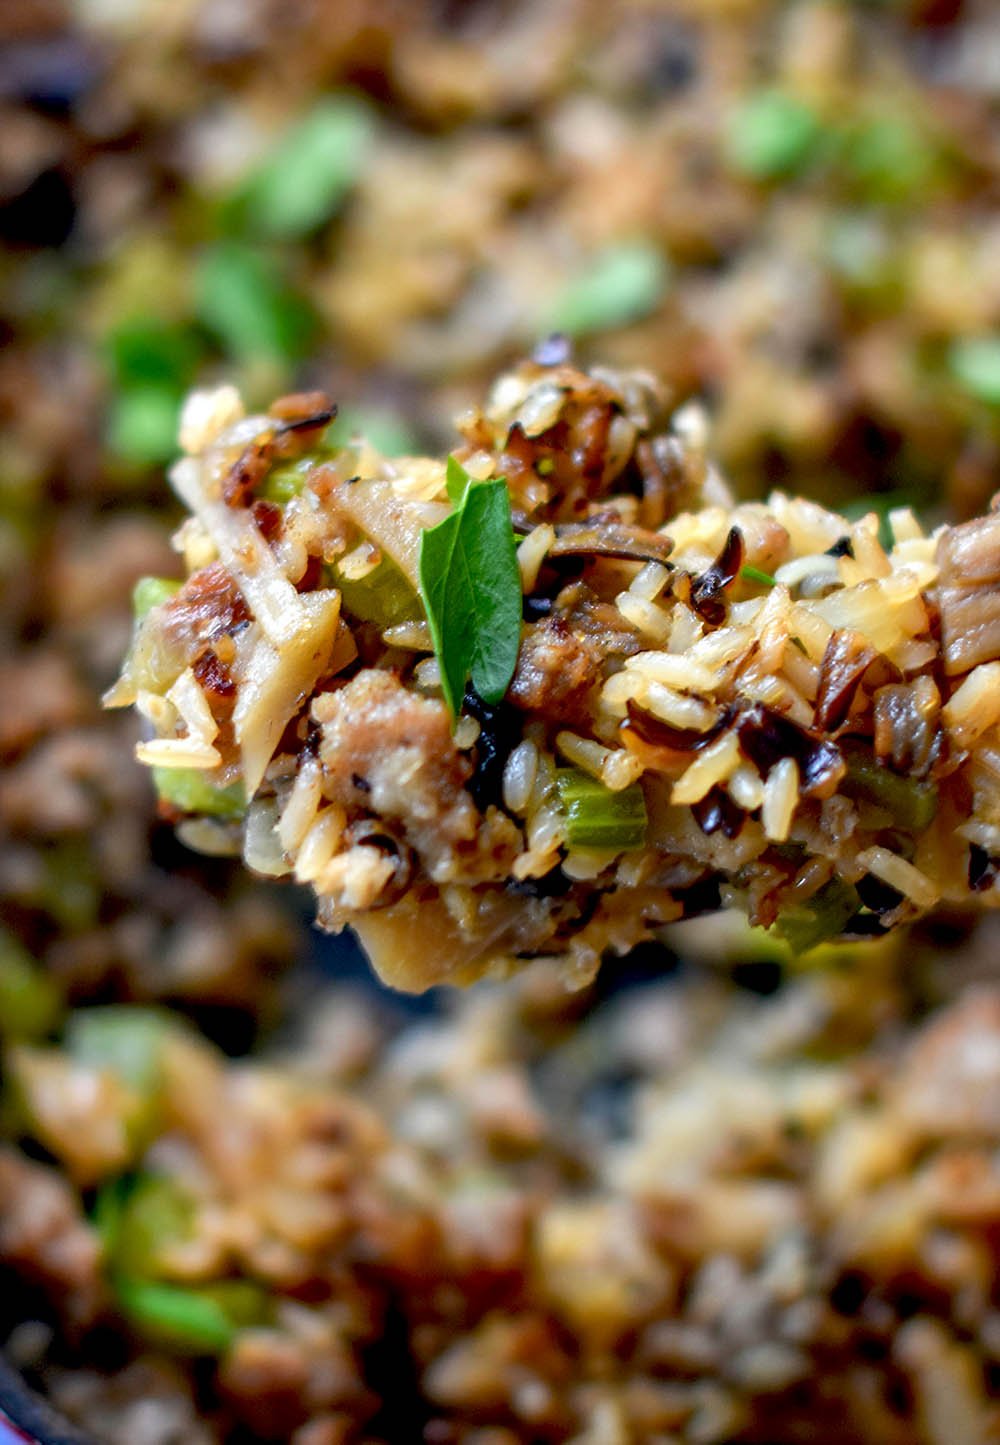 Spoonful of wild rice dressing